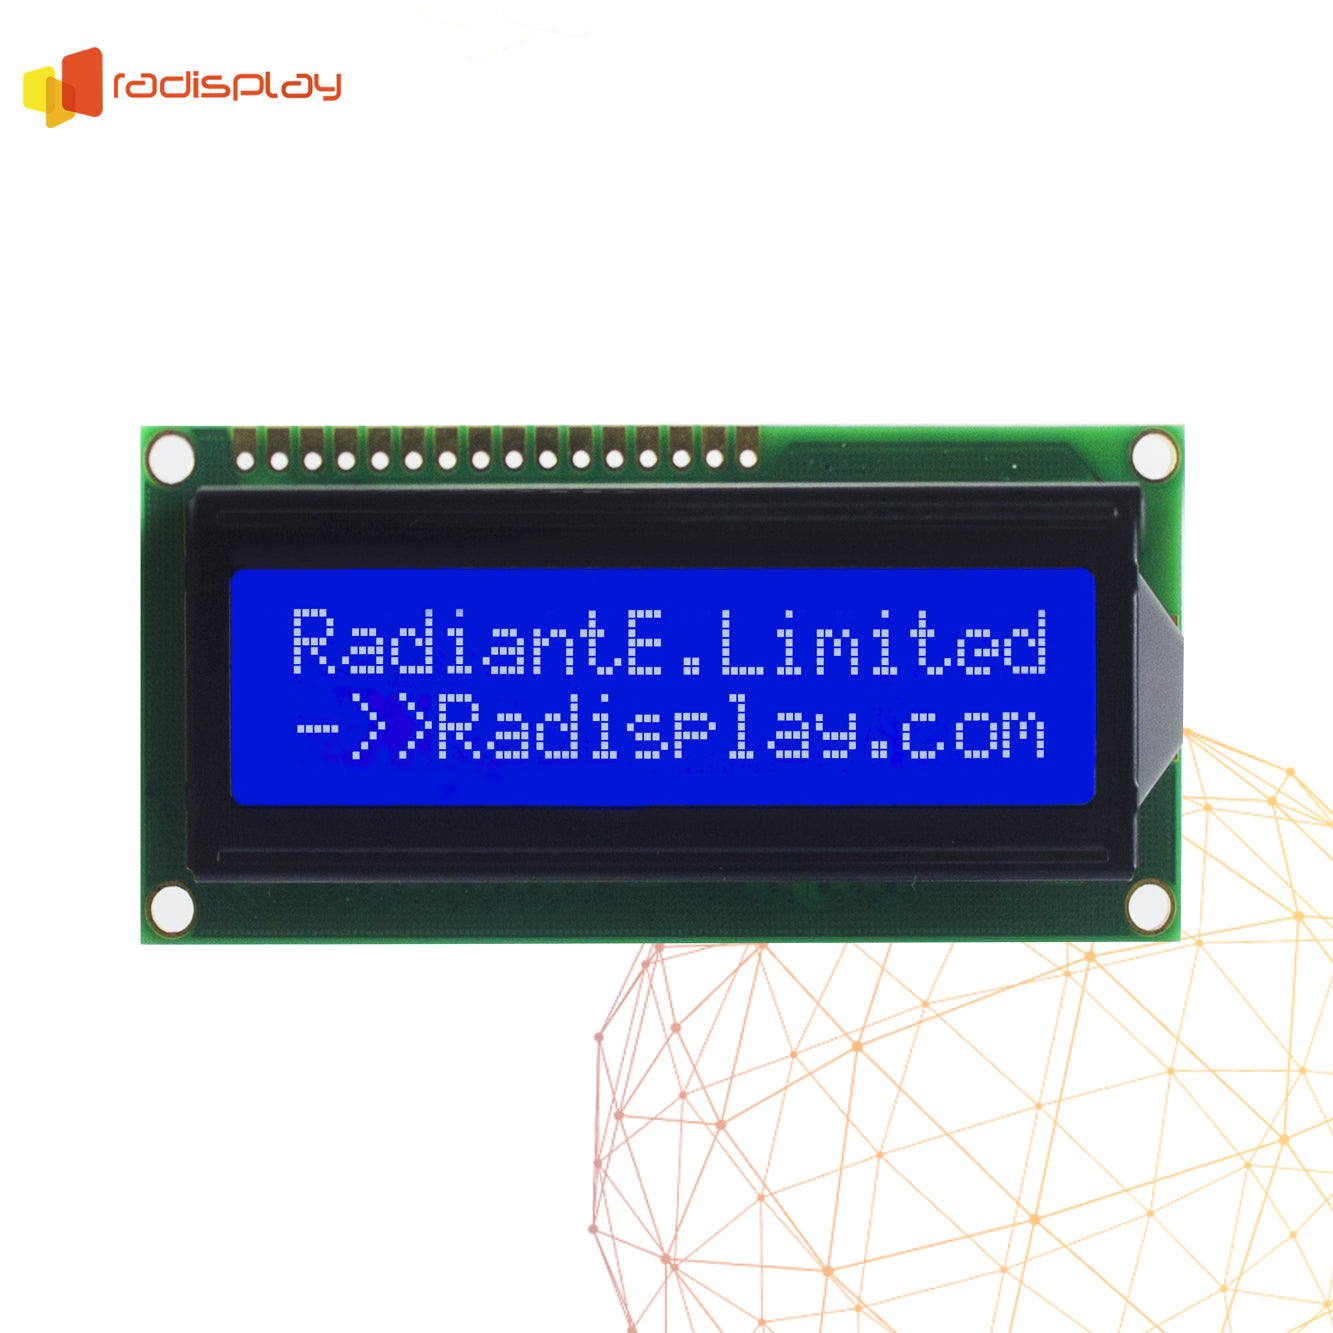 16x2 Character LCD Display Module (RD1602A-8)